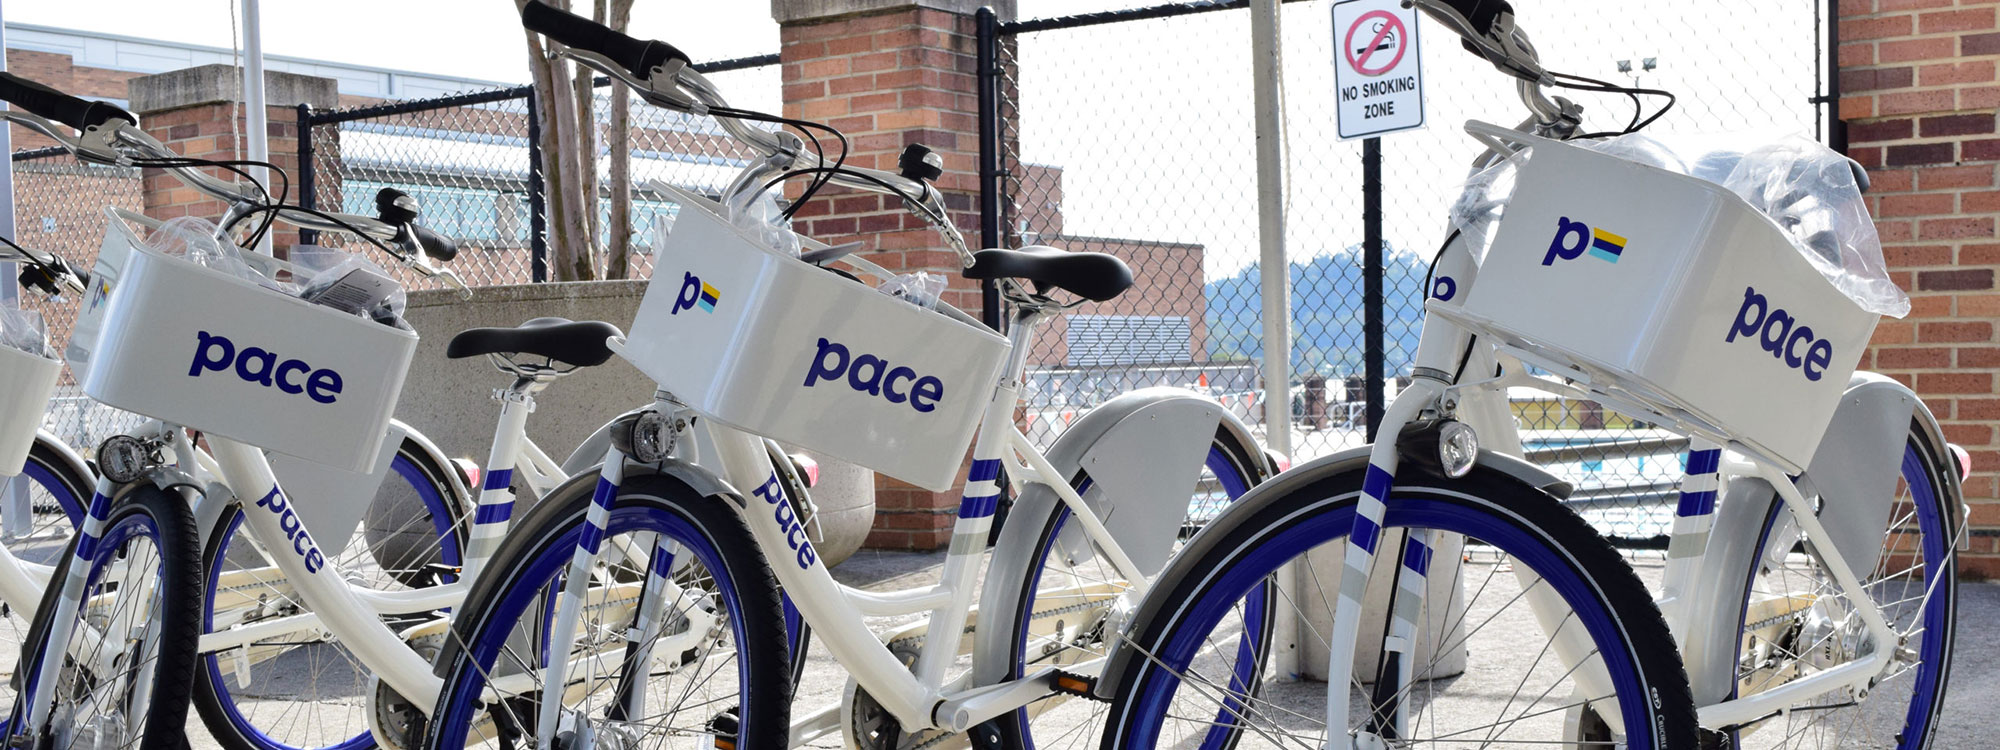 PACE bicycles